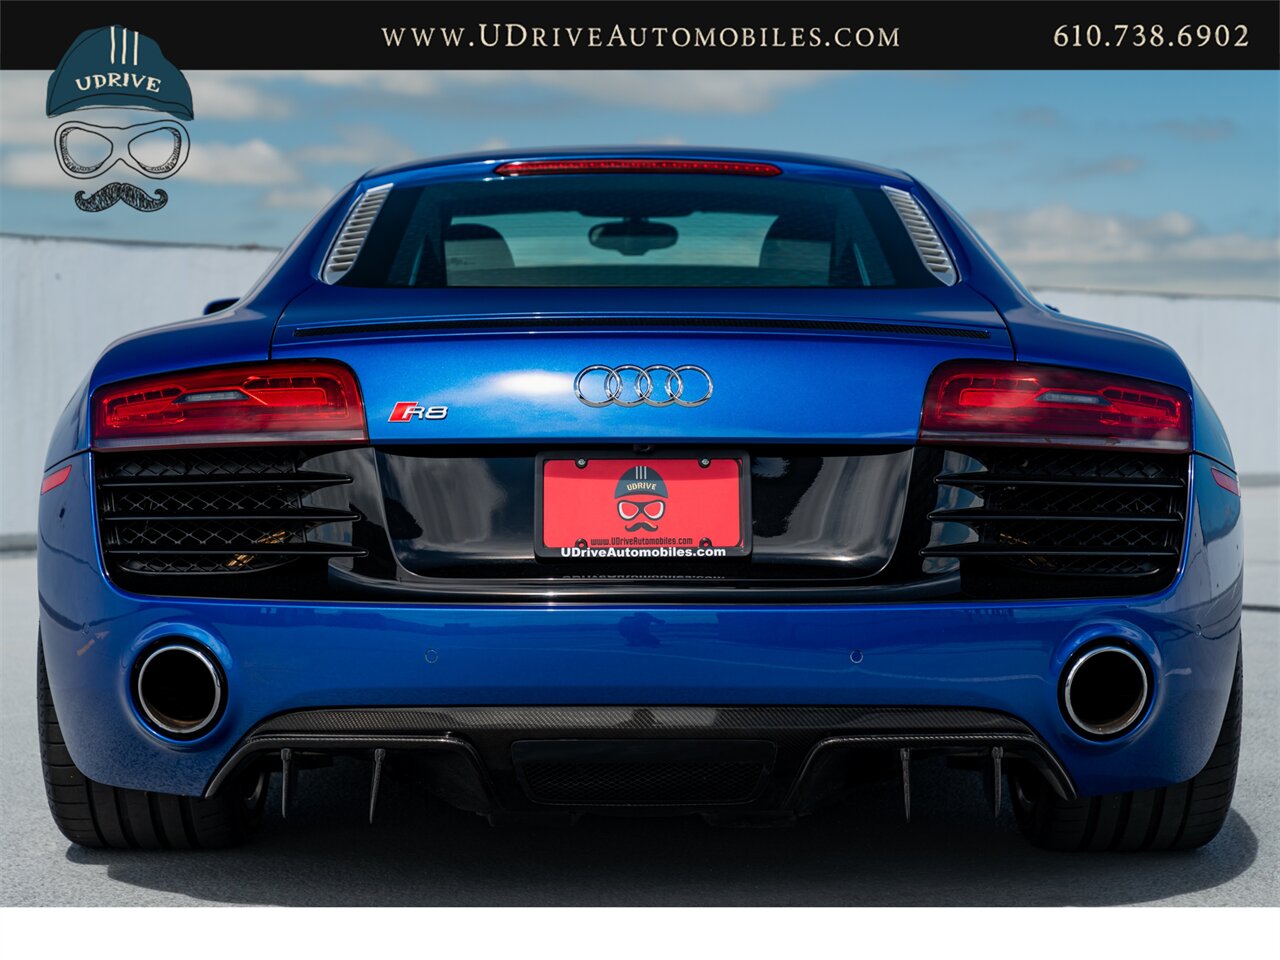 2015 Audi R8 5.2 V10 Quattro 6 Speed Manual 10k Miles  Diamond Stitched Leather 1 of 2 - Photo 20 - West Chester, PA 19382